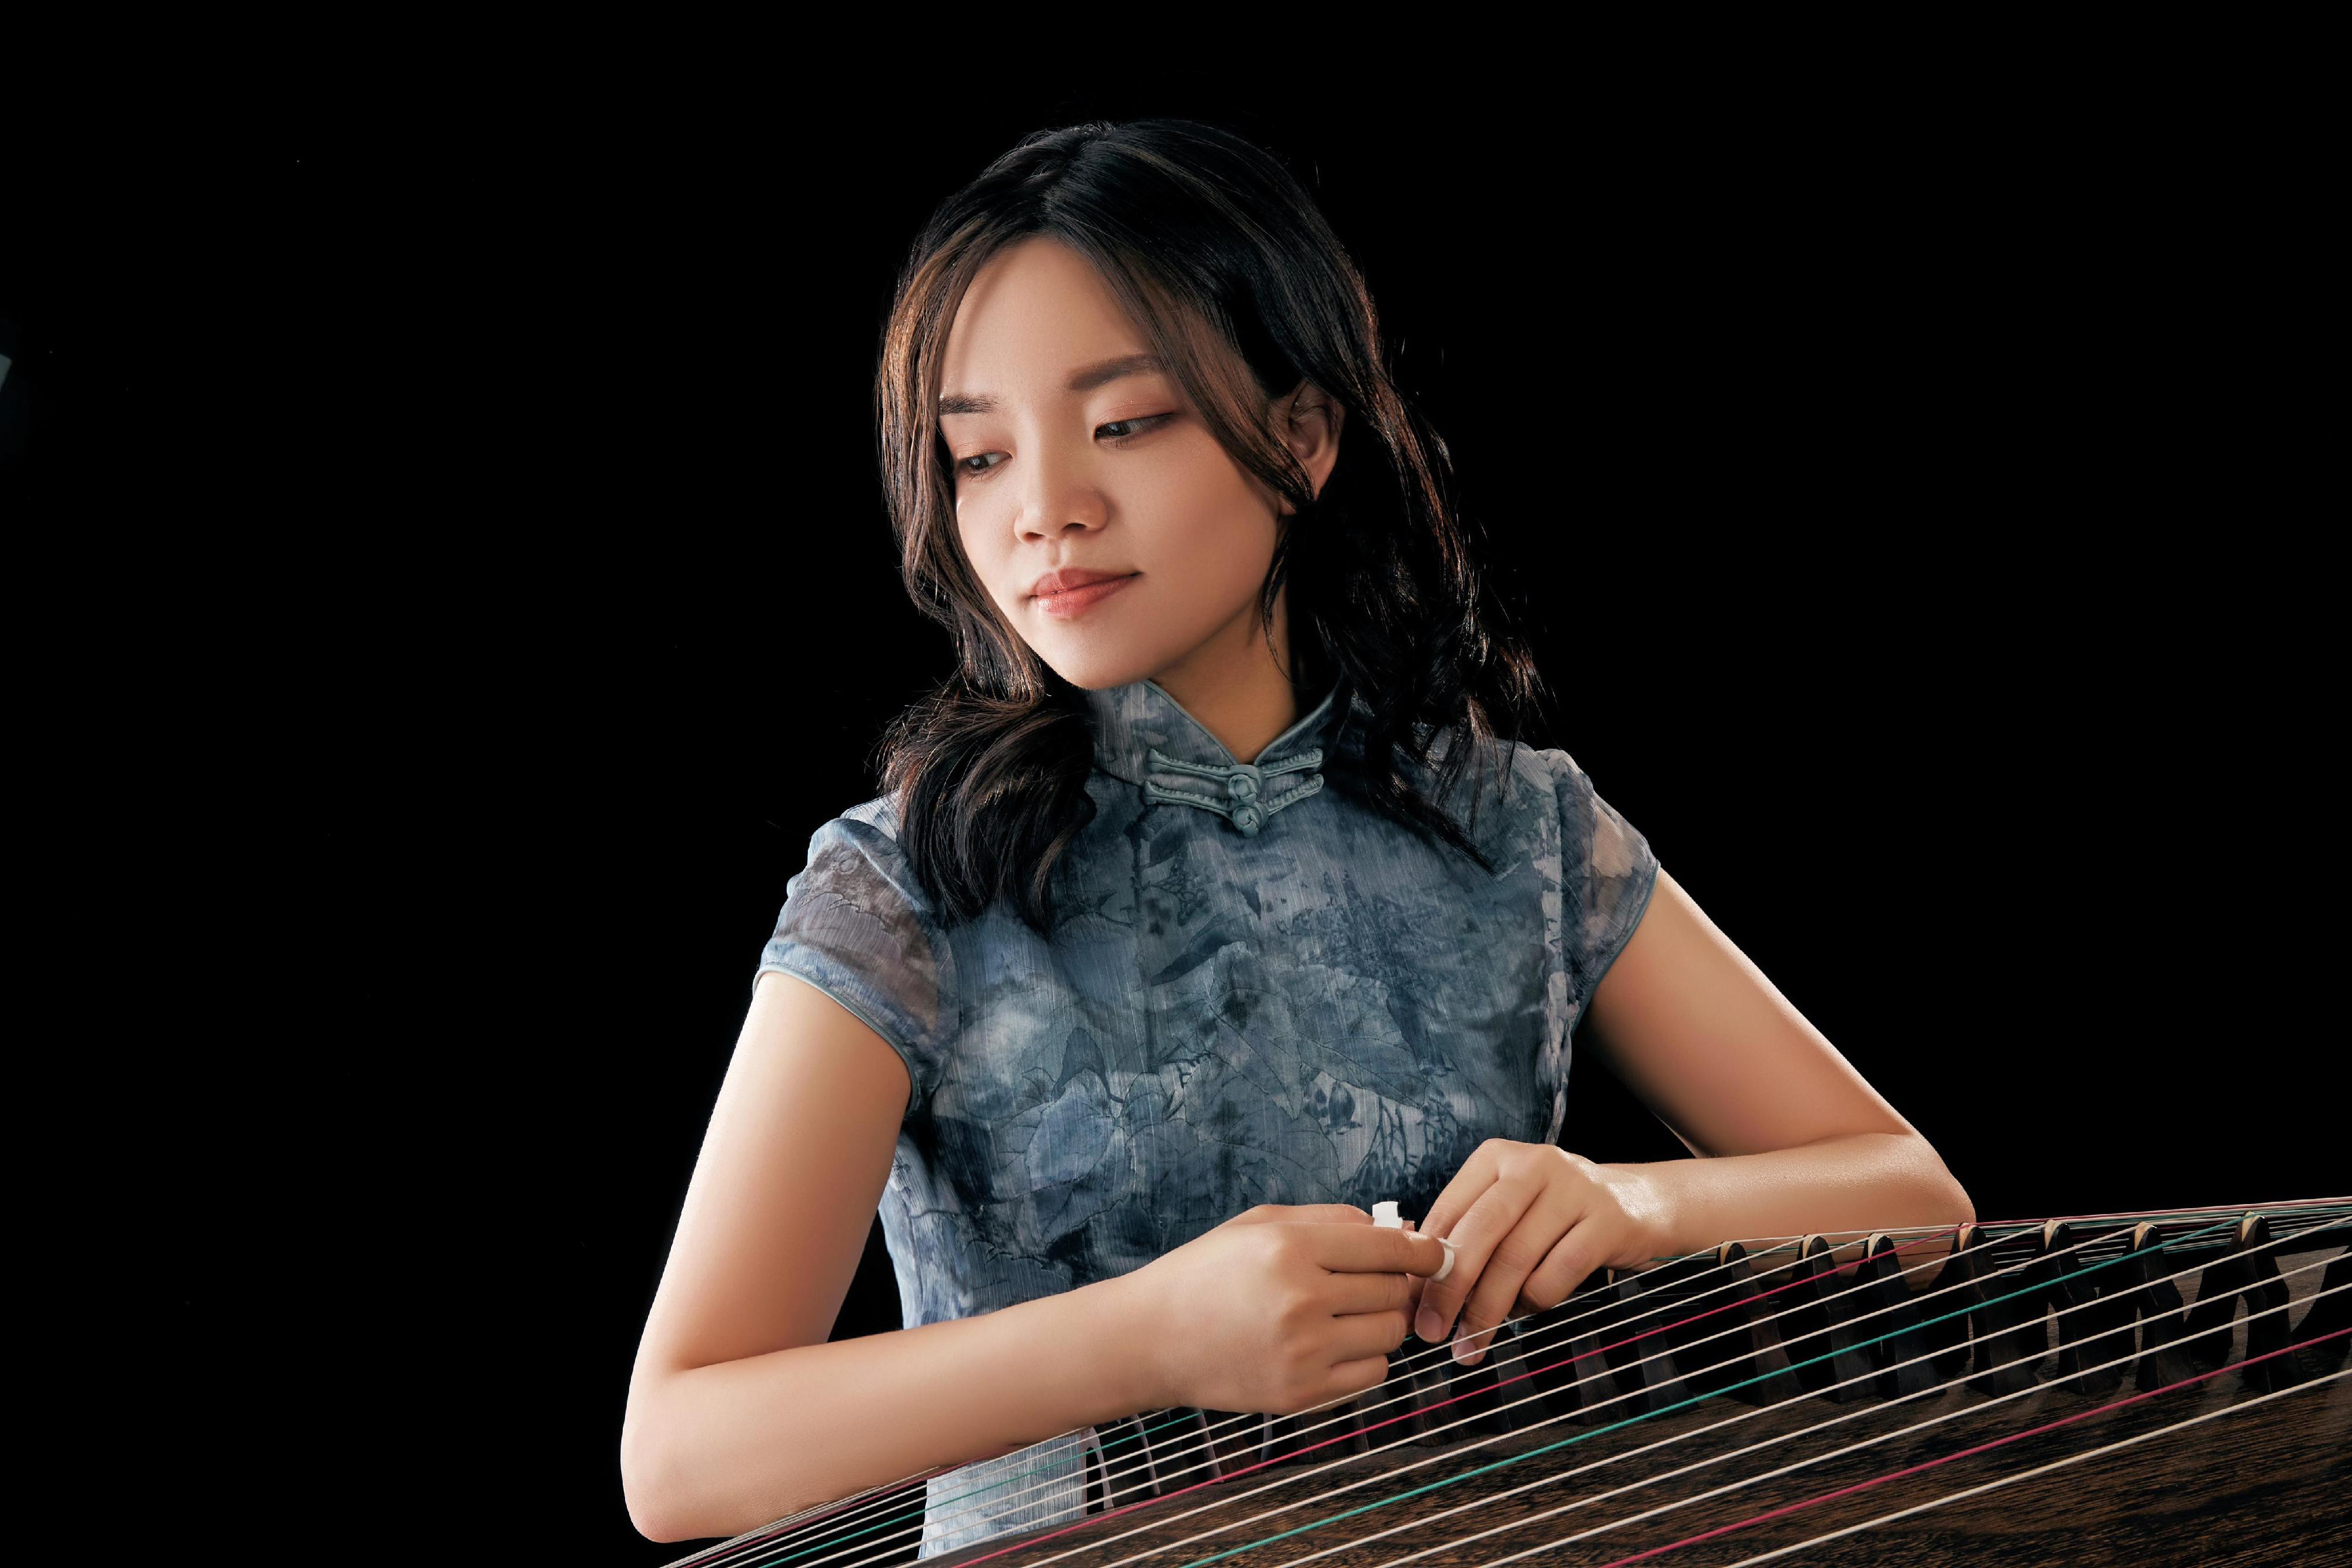 The "Tajik Music with Sirojiddin Juraev - Tradition and Innovation on the Silk Road" concert will be held on June 17. Photo shows local guzheng performer Jessie Law. 
